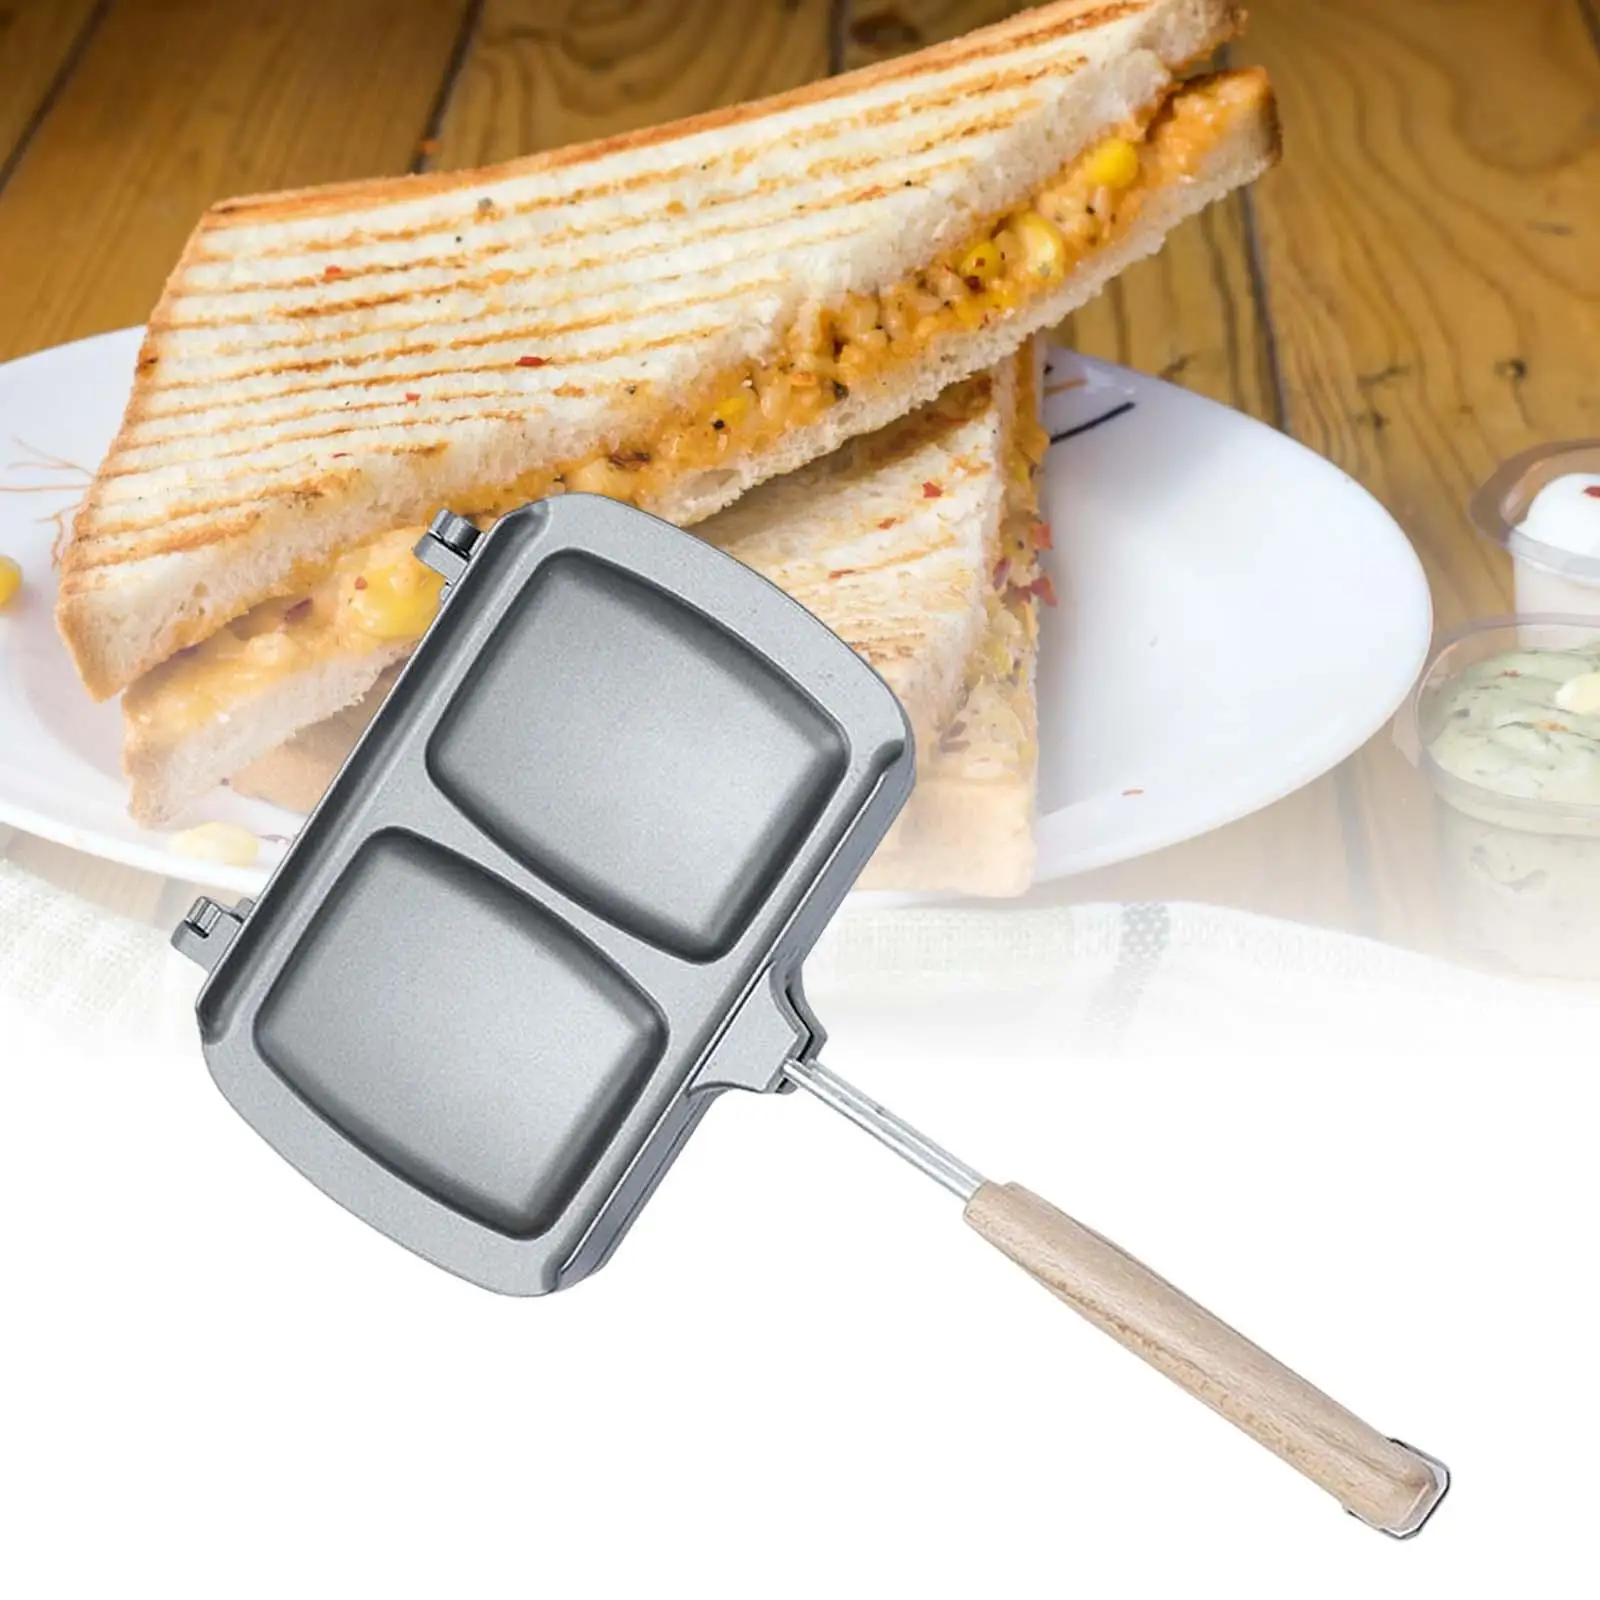 Bread Toast Maker Non Stick Grill Pan Double Sided Heating Frying Egg Ham Sandwiches Maker for Induction Cooker Stove Top